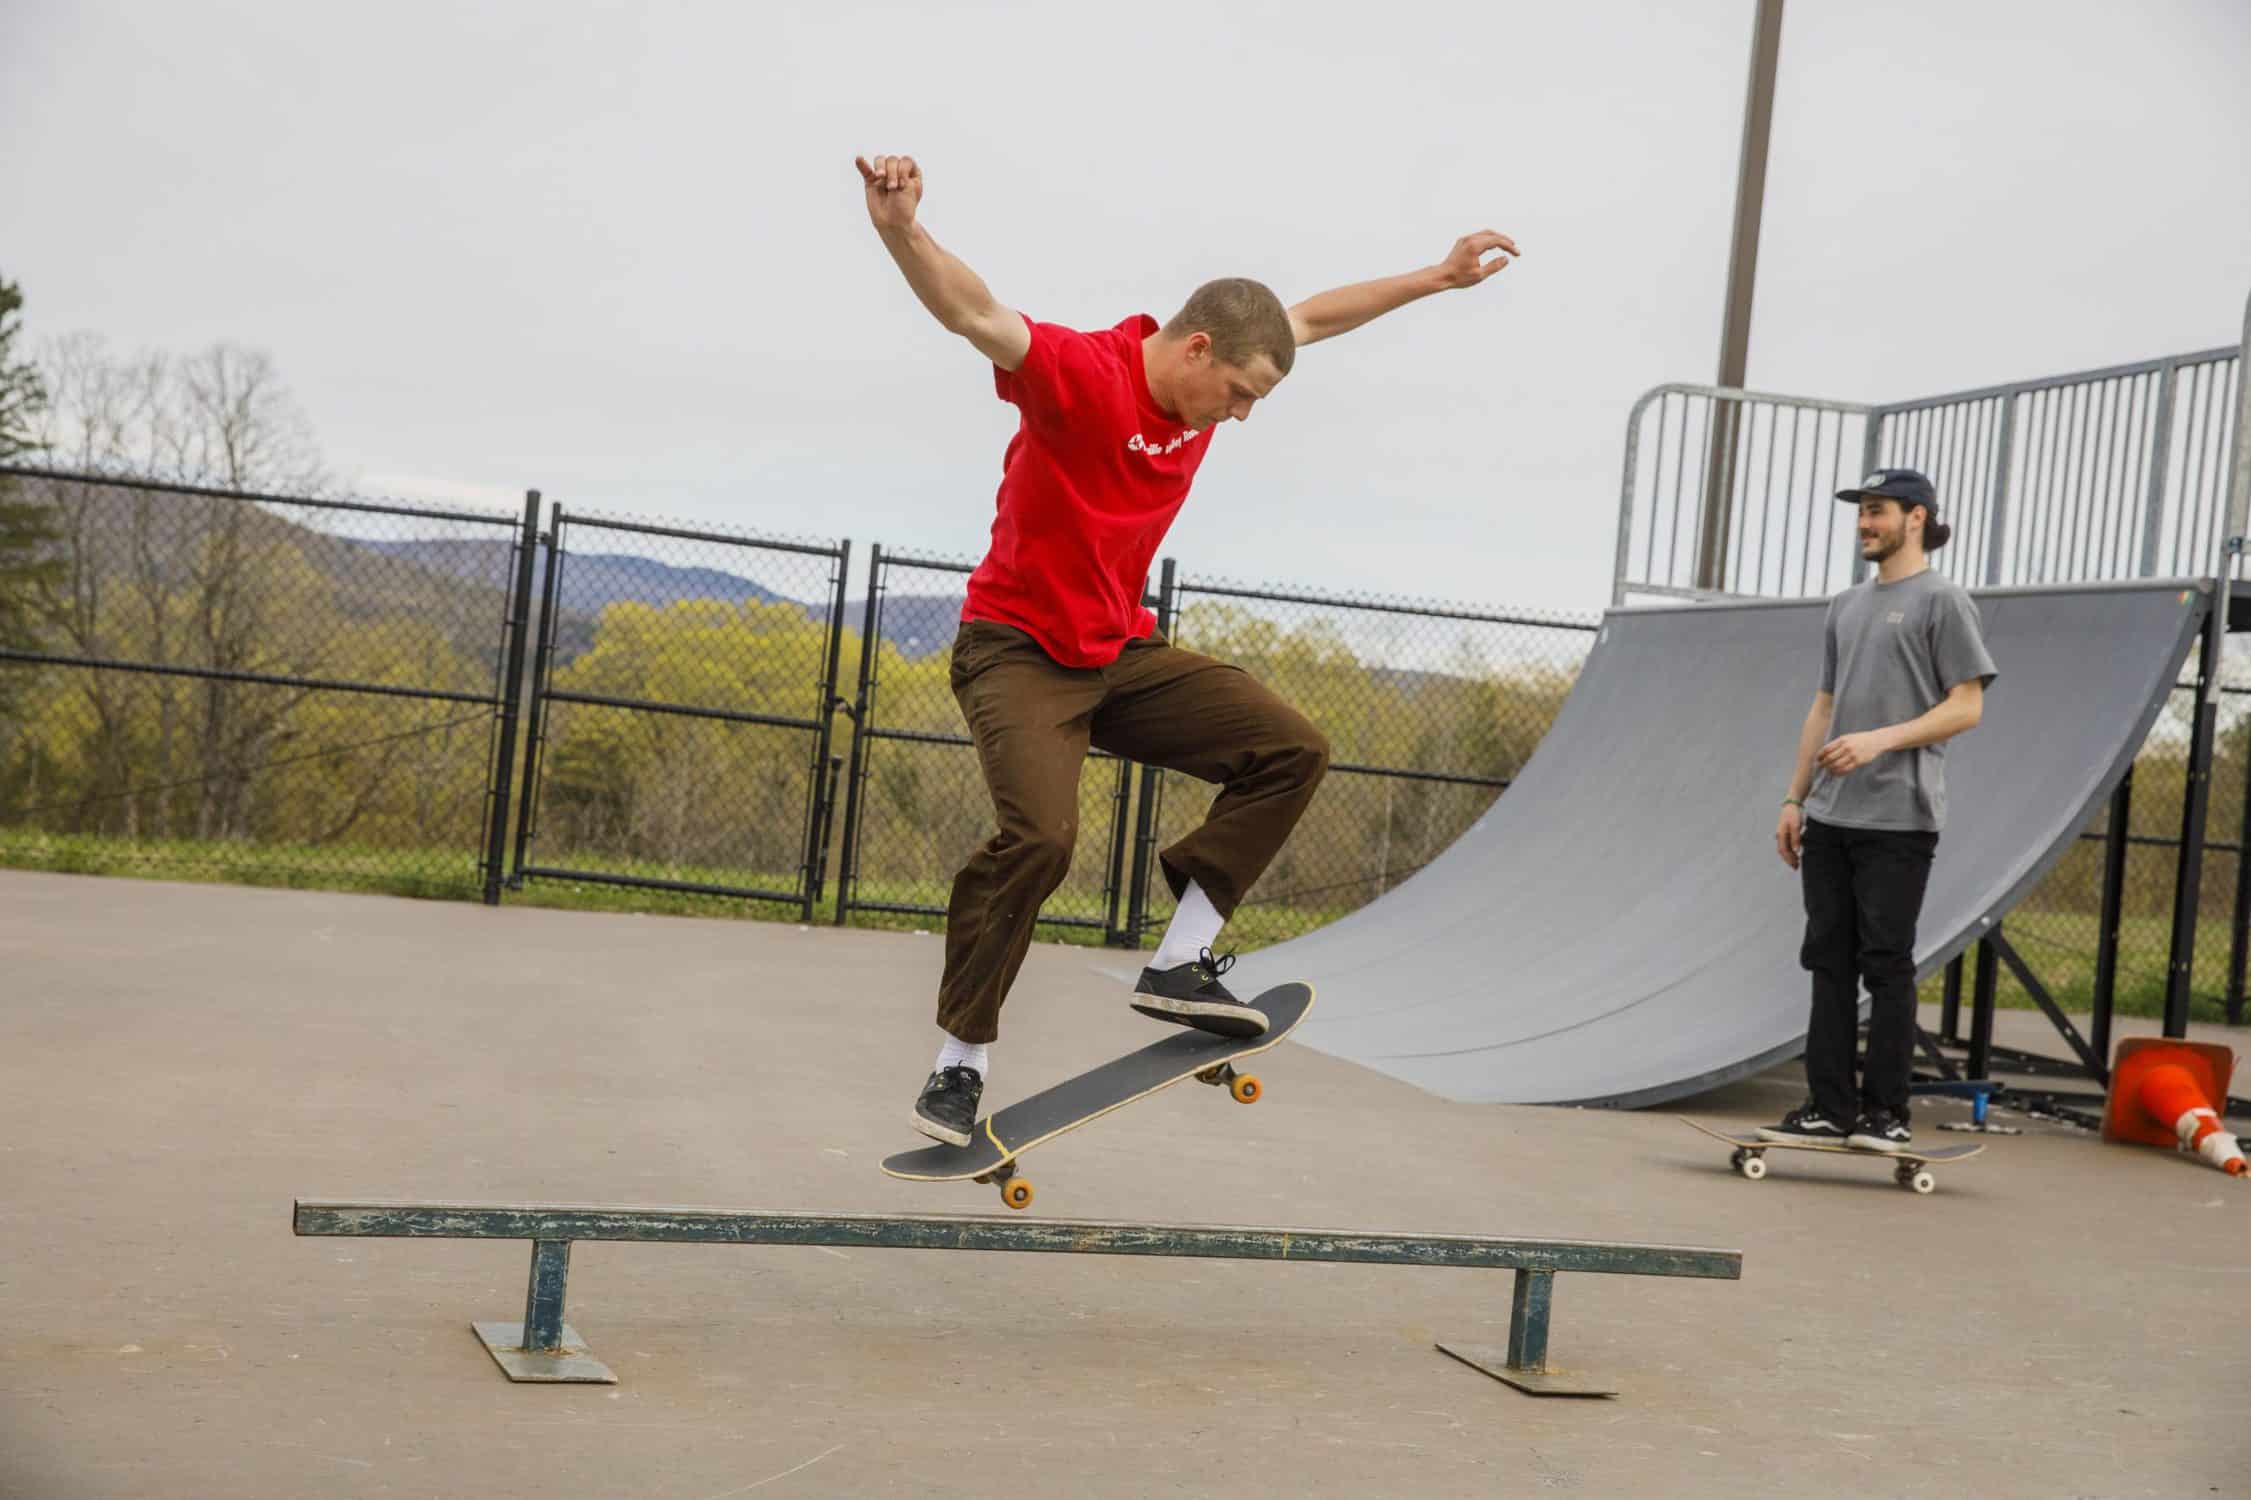 Student rides skateboard at the skate park on campus